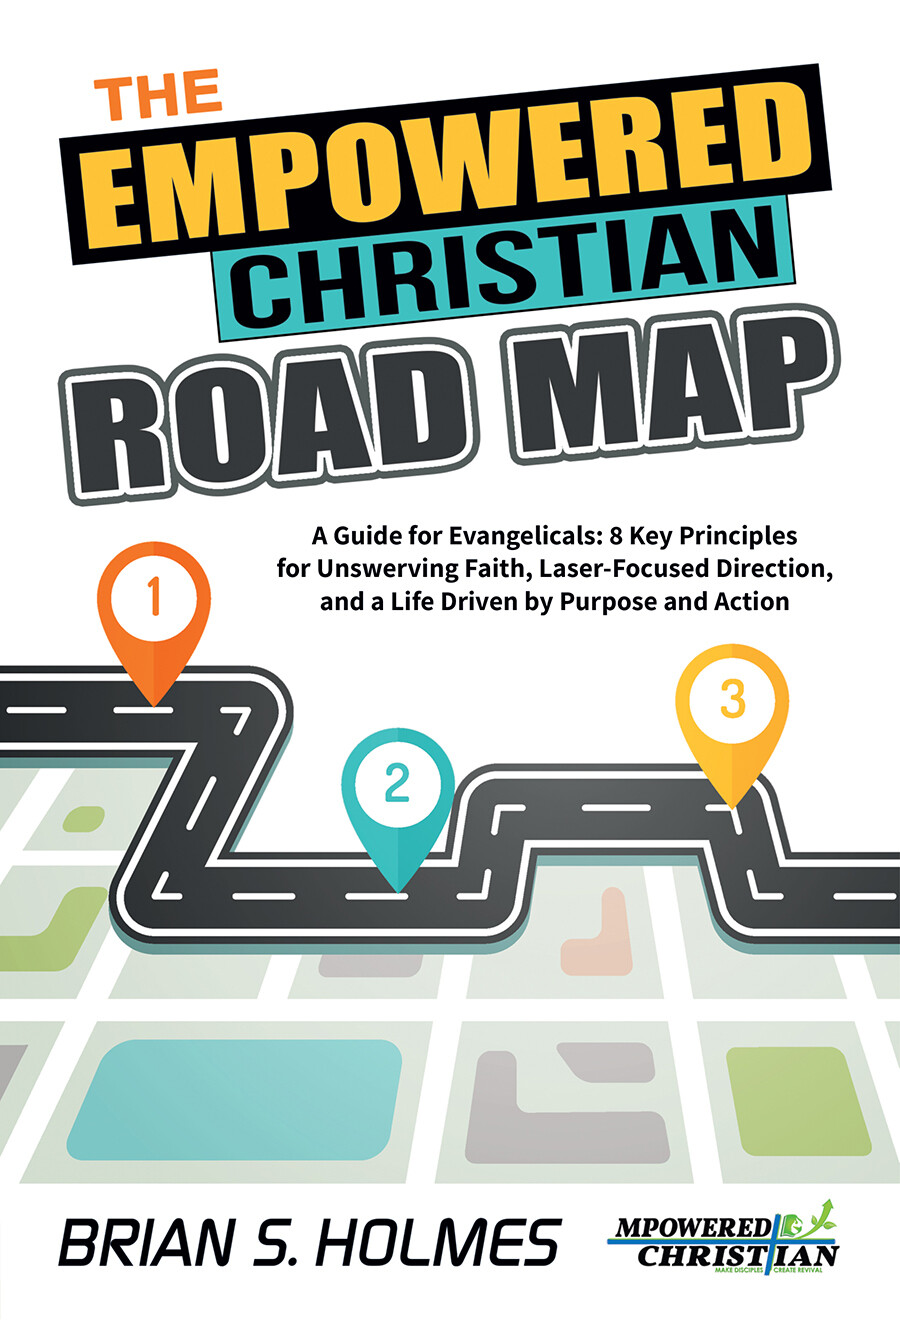 The Empowered Christian Road Map (Paperback)